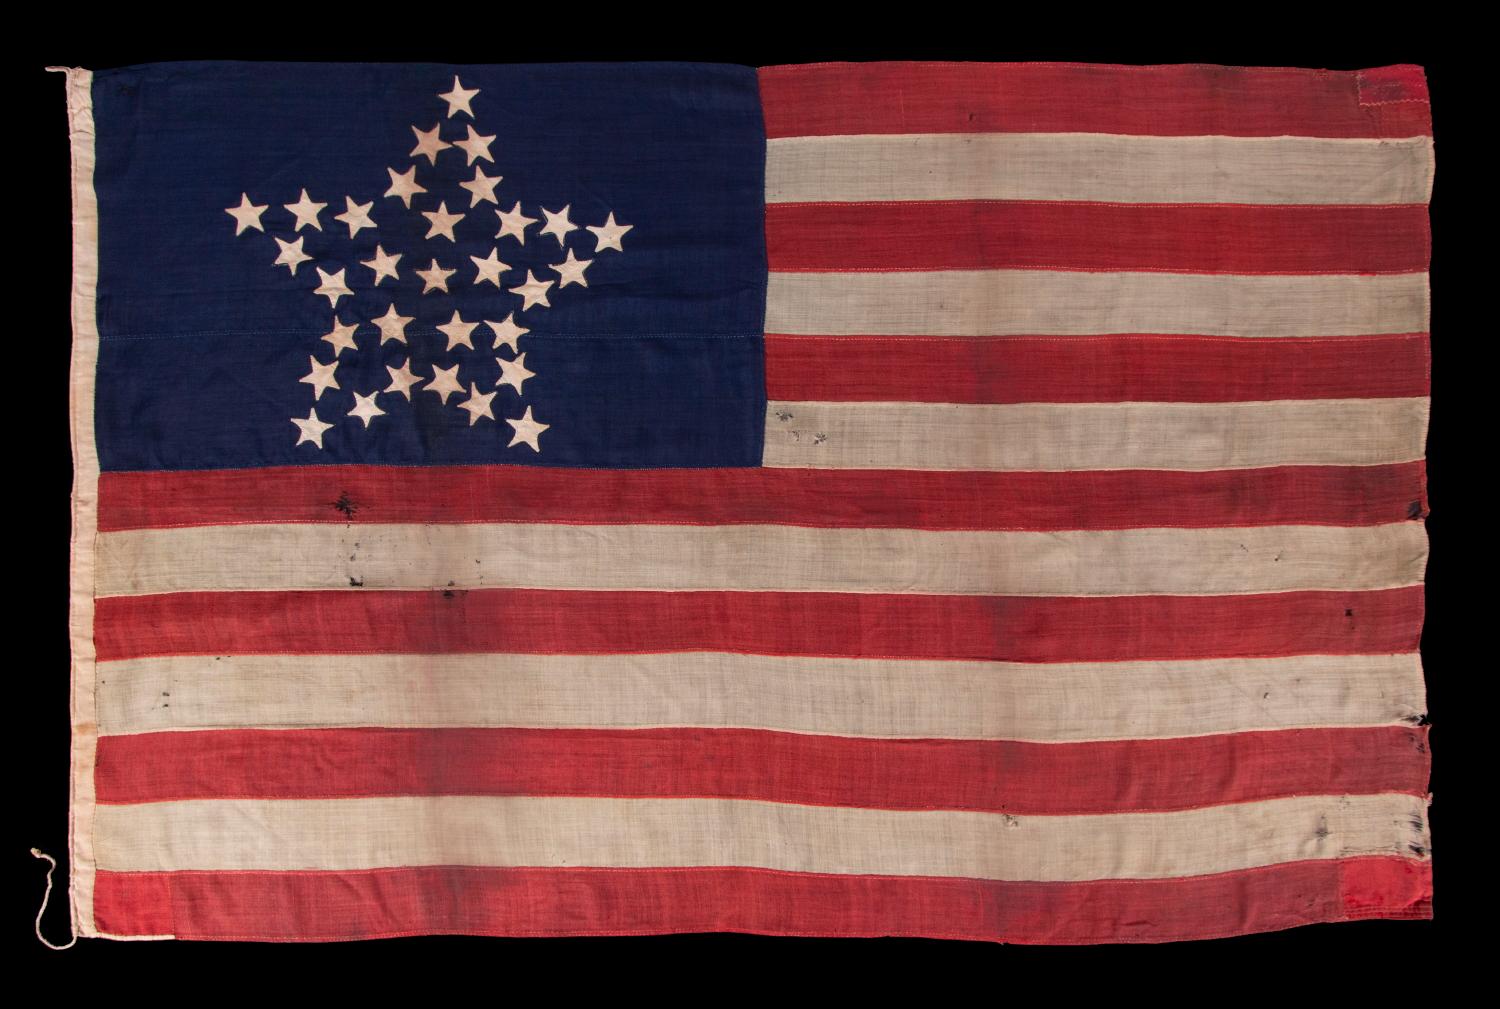 Spectacular antique American flag with 31 stars arranged in the 